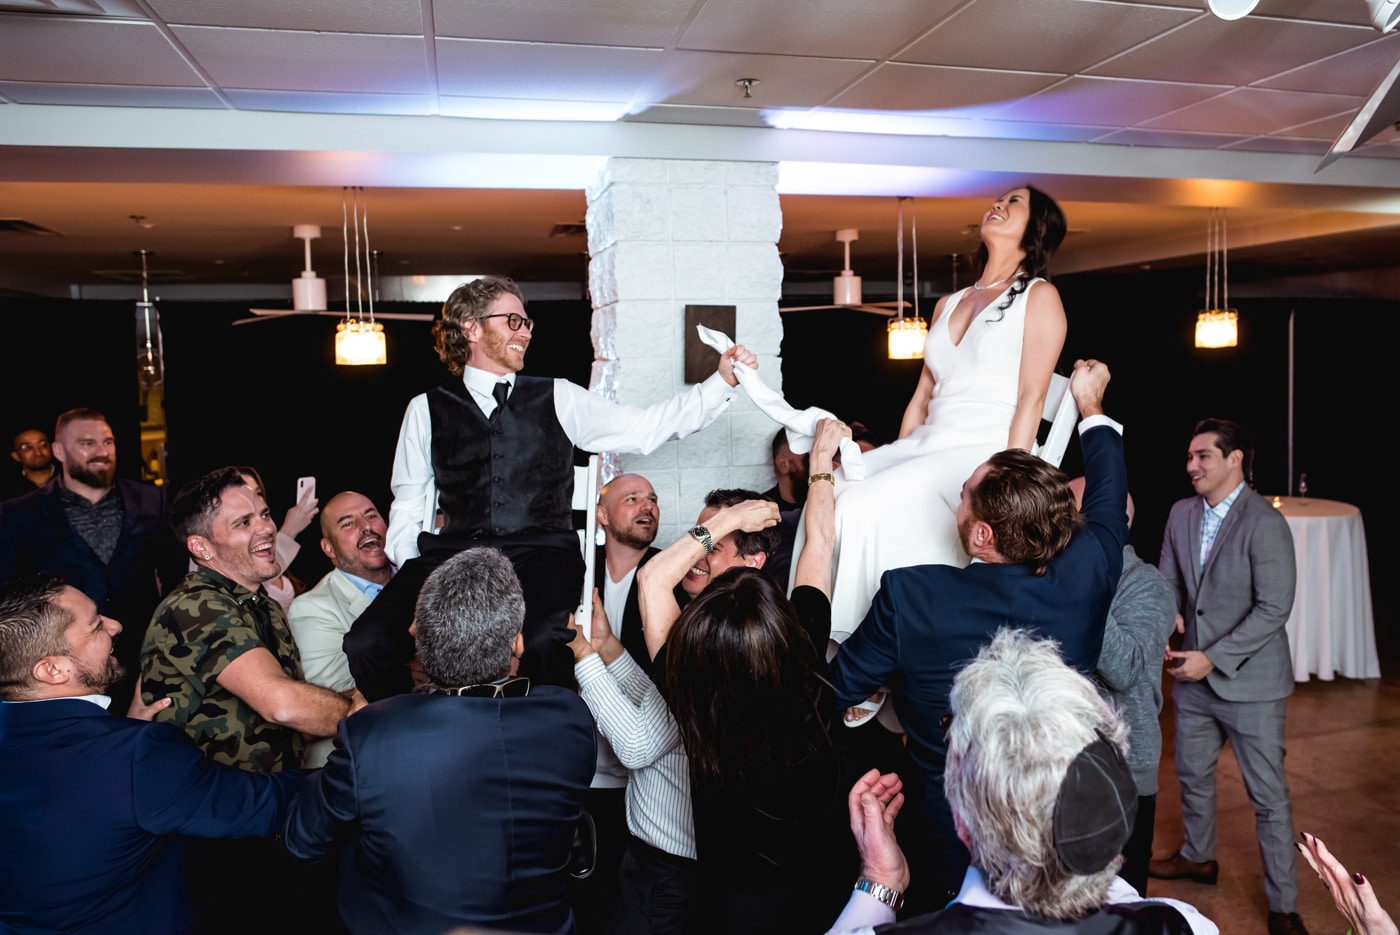 Bride and groom on lifted chairs for horah tradition